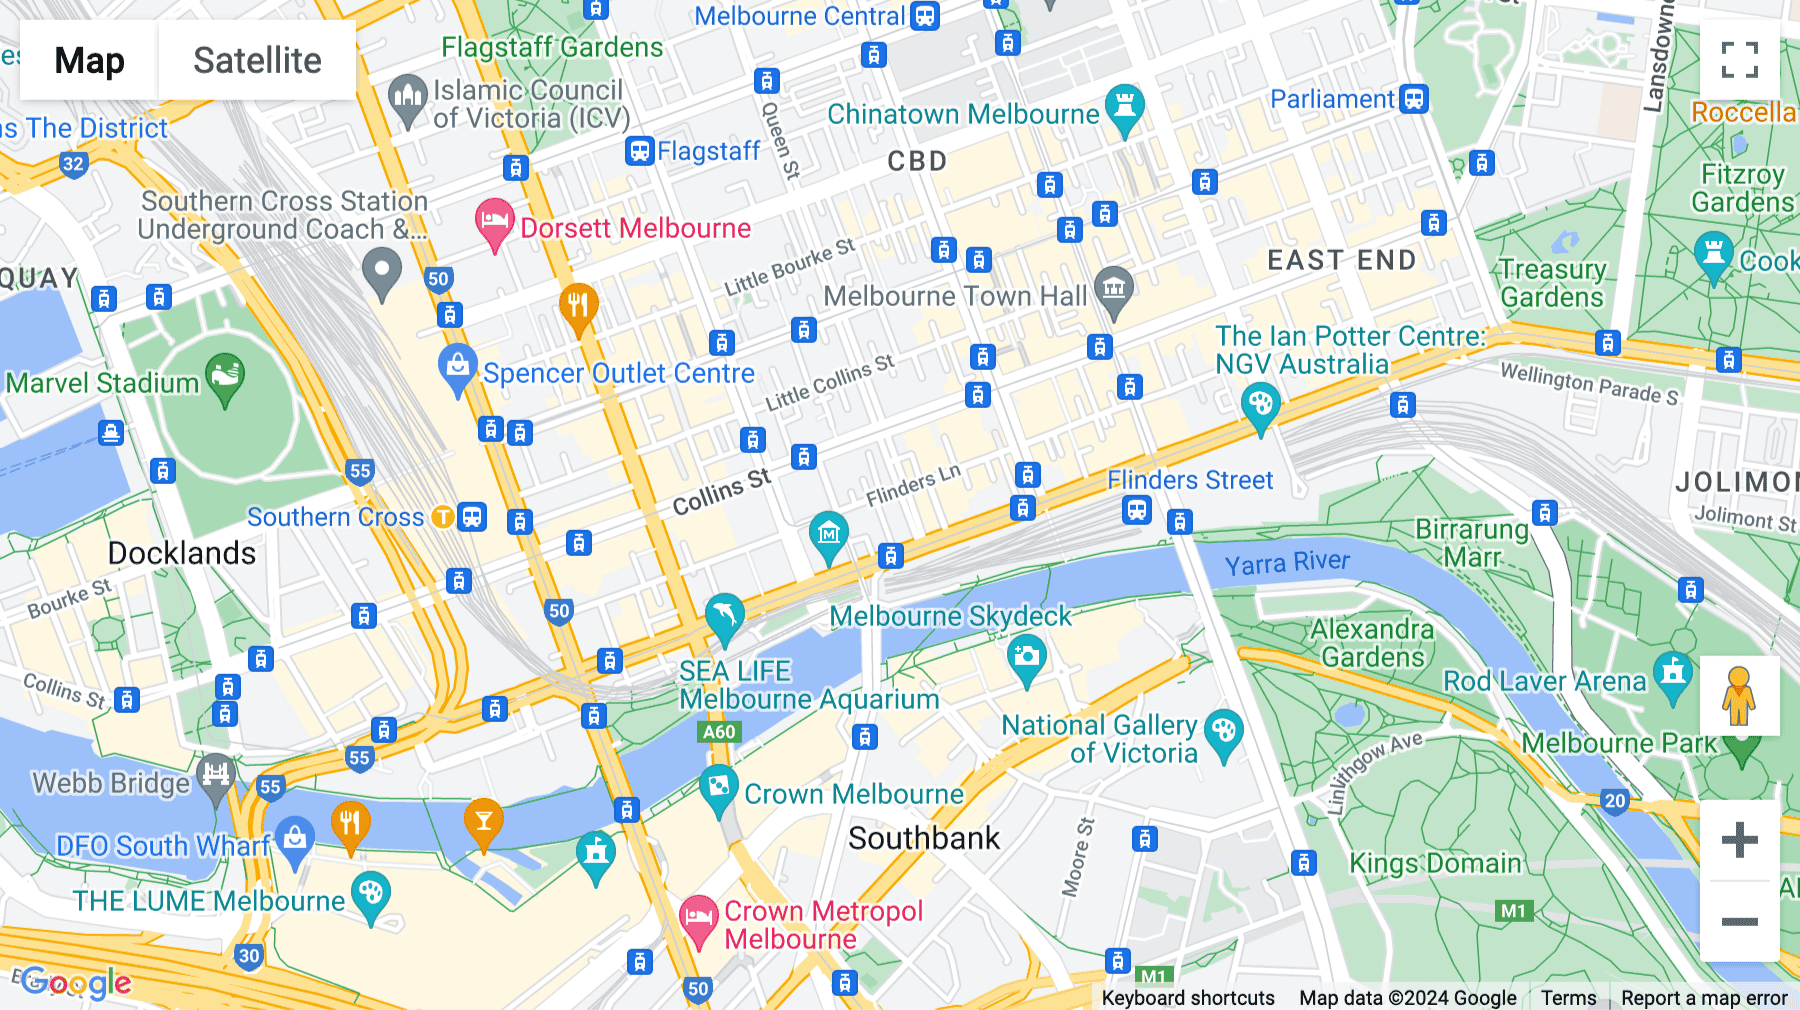 Click for interative map of Queen Street, Level 17, 20, 21, 31, Melbourne